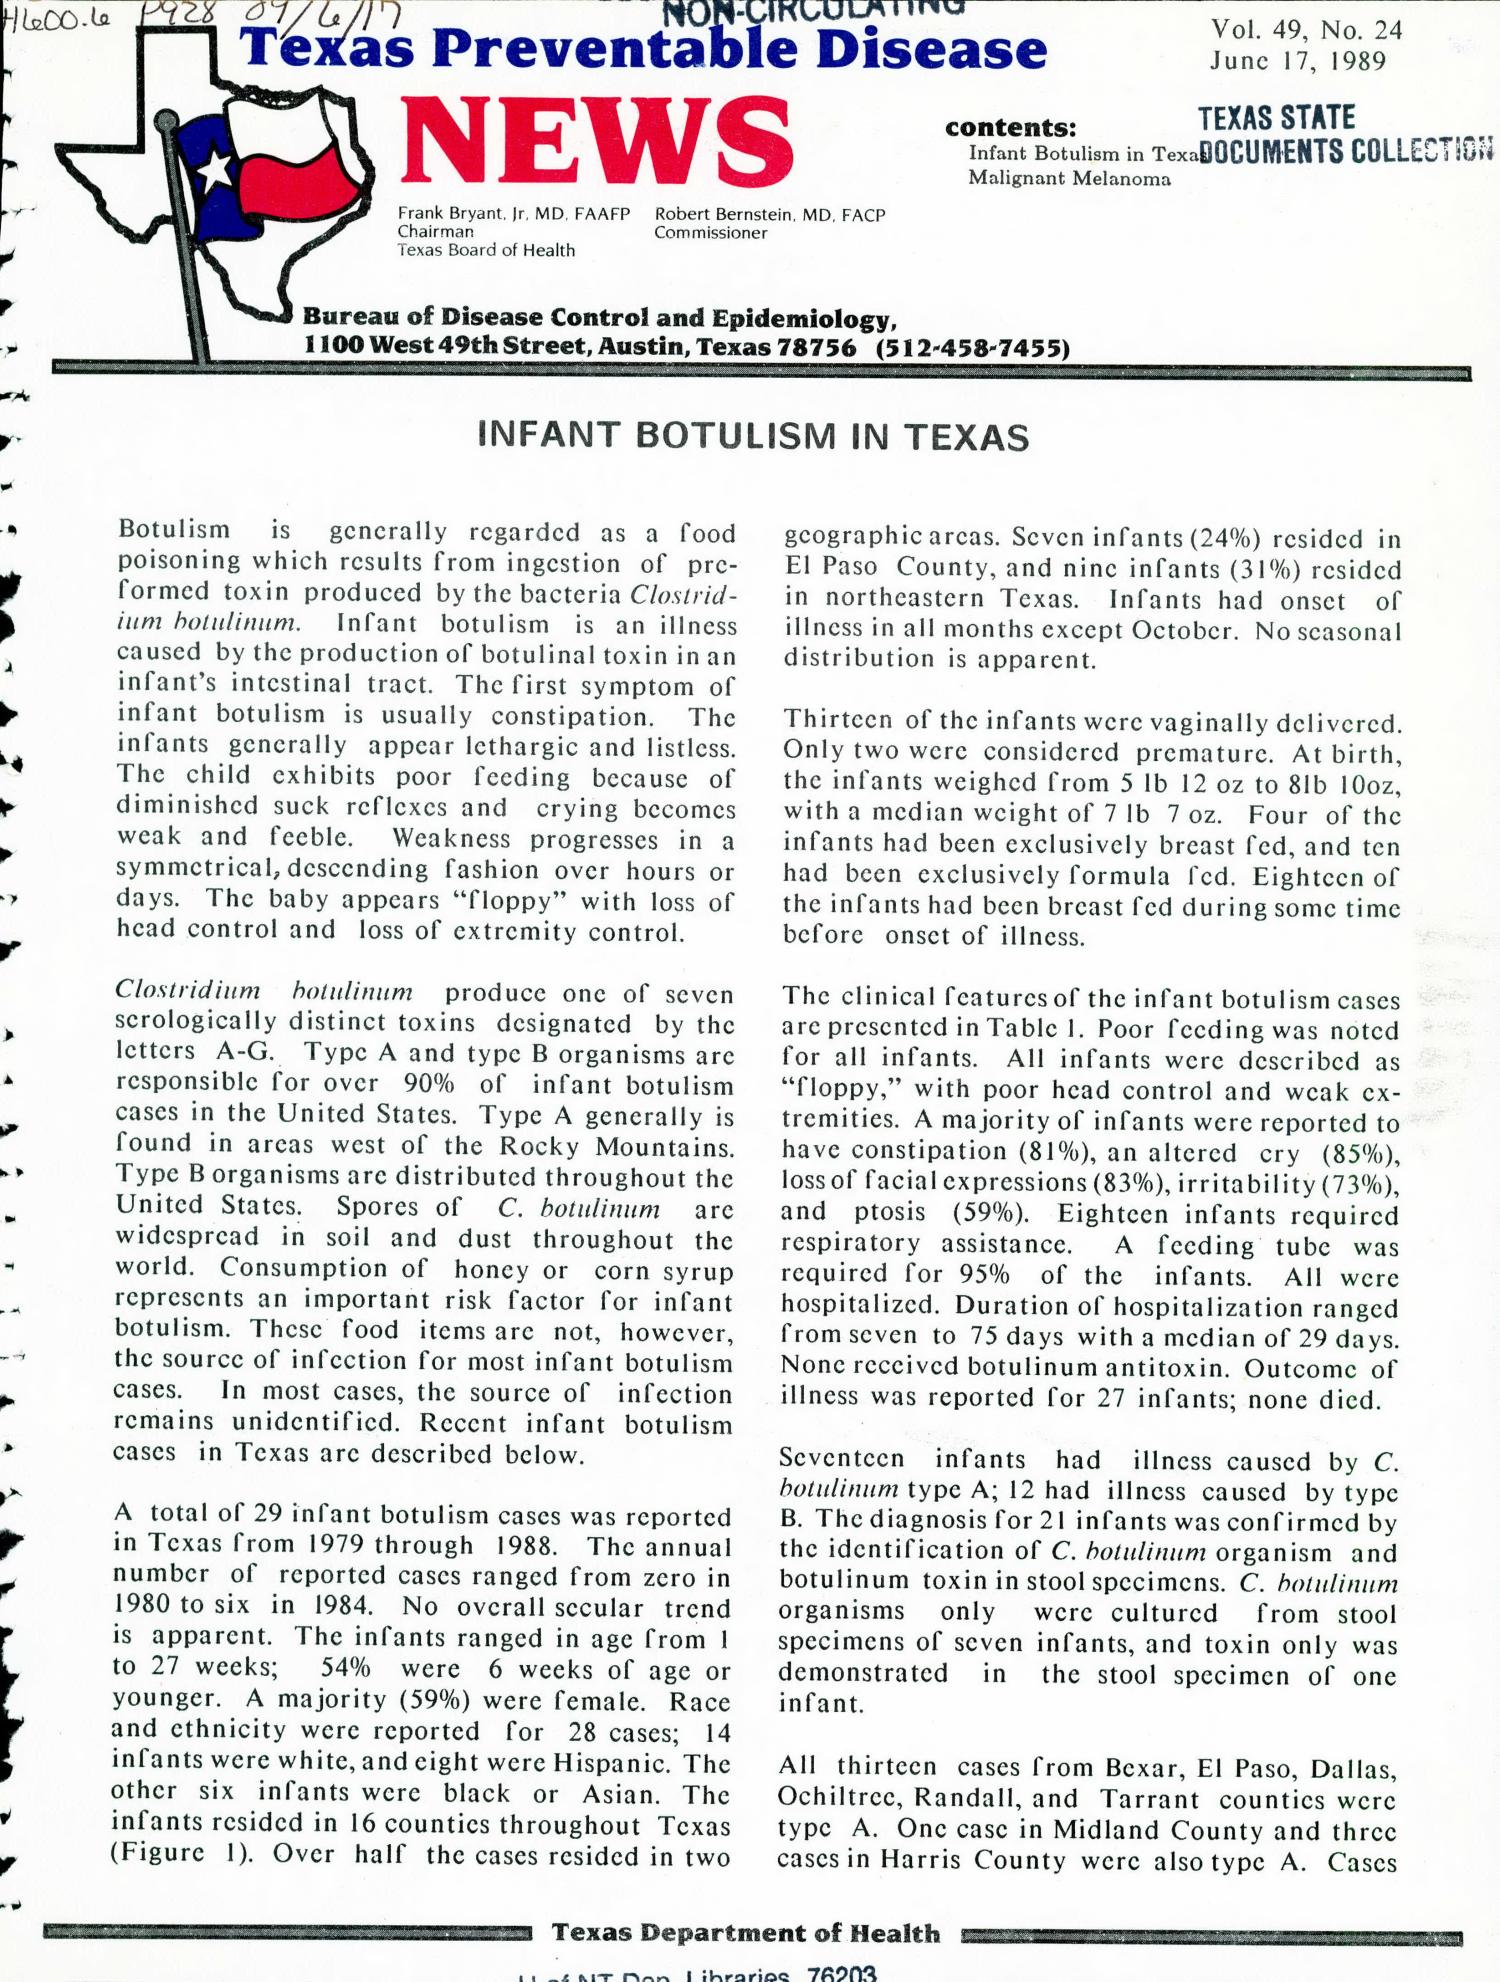 Texas Preventable Disease News, Volume 49, Number 24, June 17, 1989
                                                
                                                    FRONT COVER
                                                